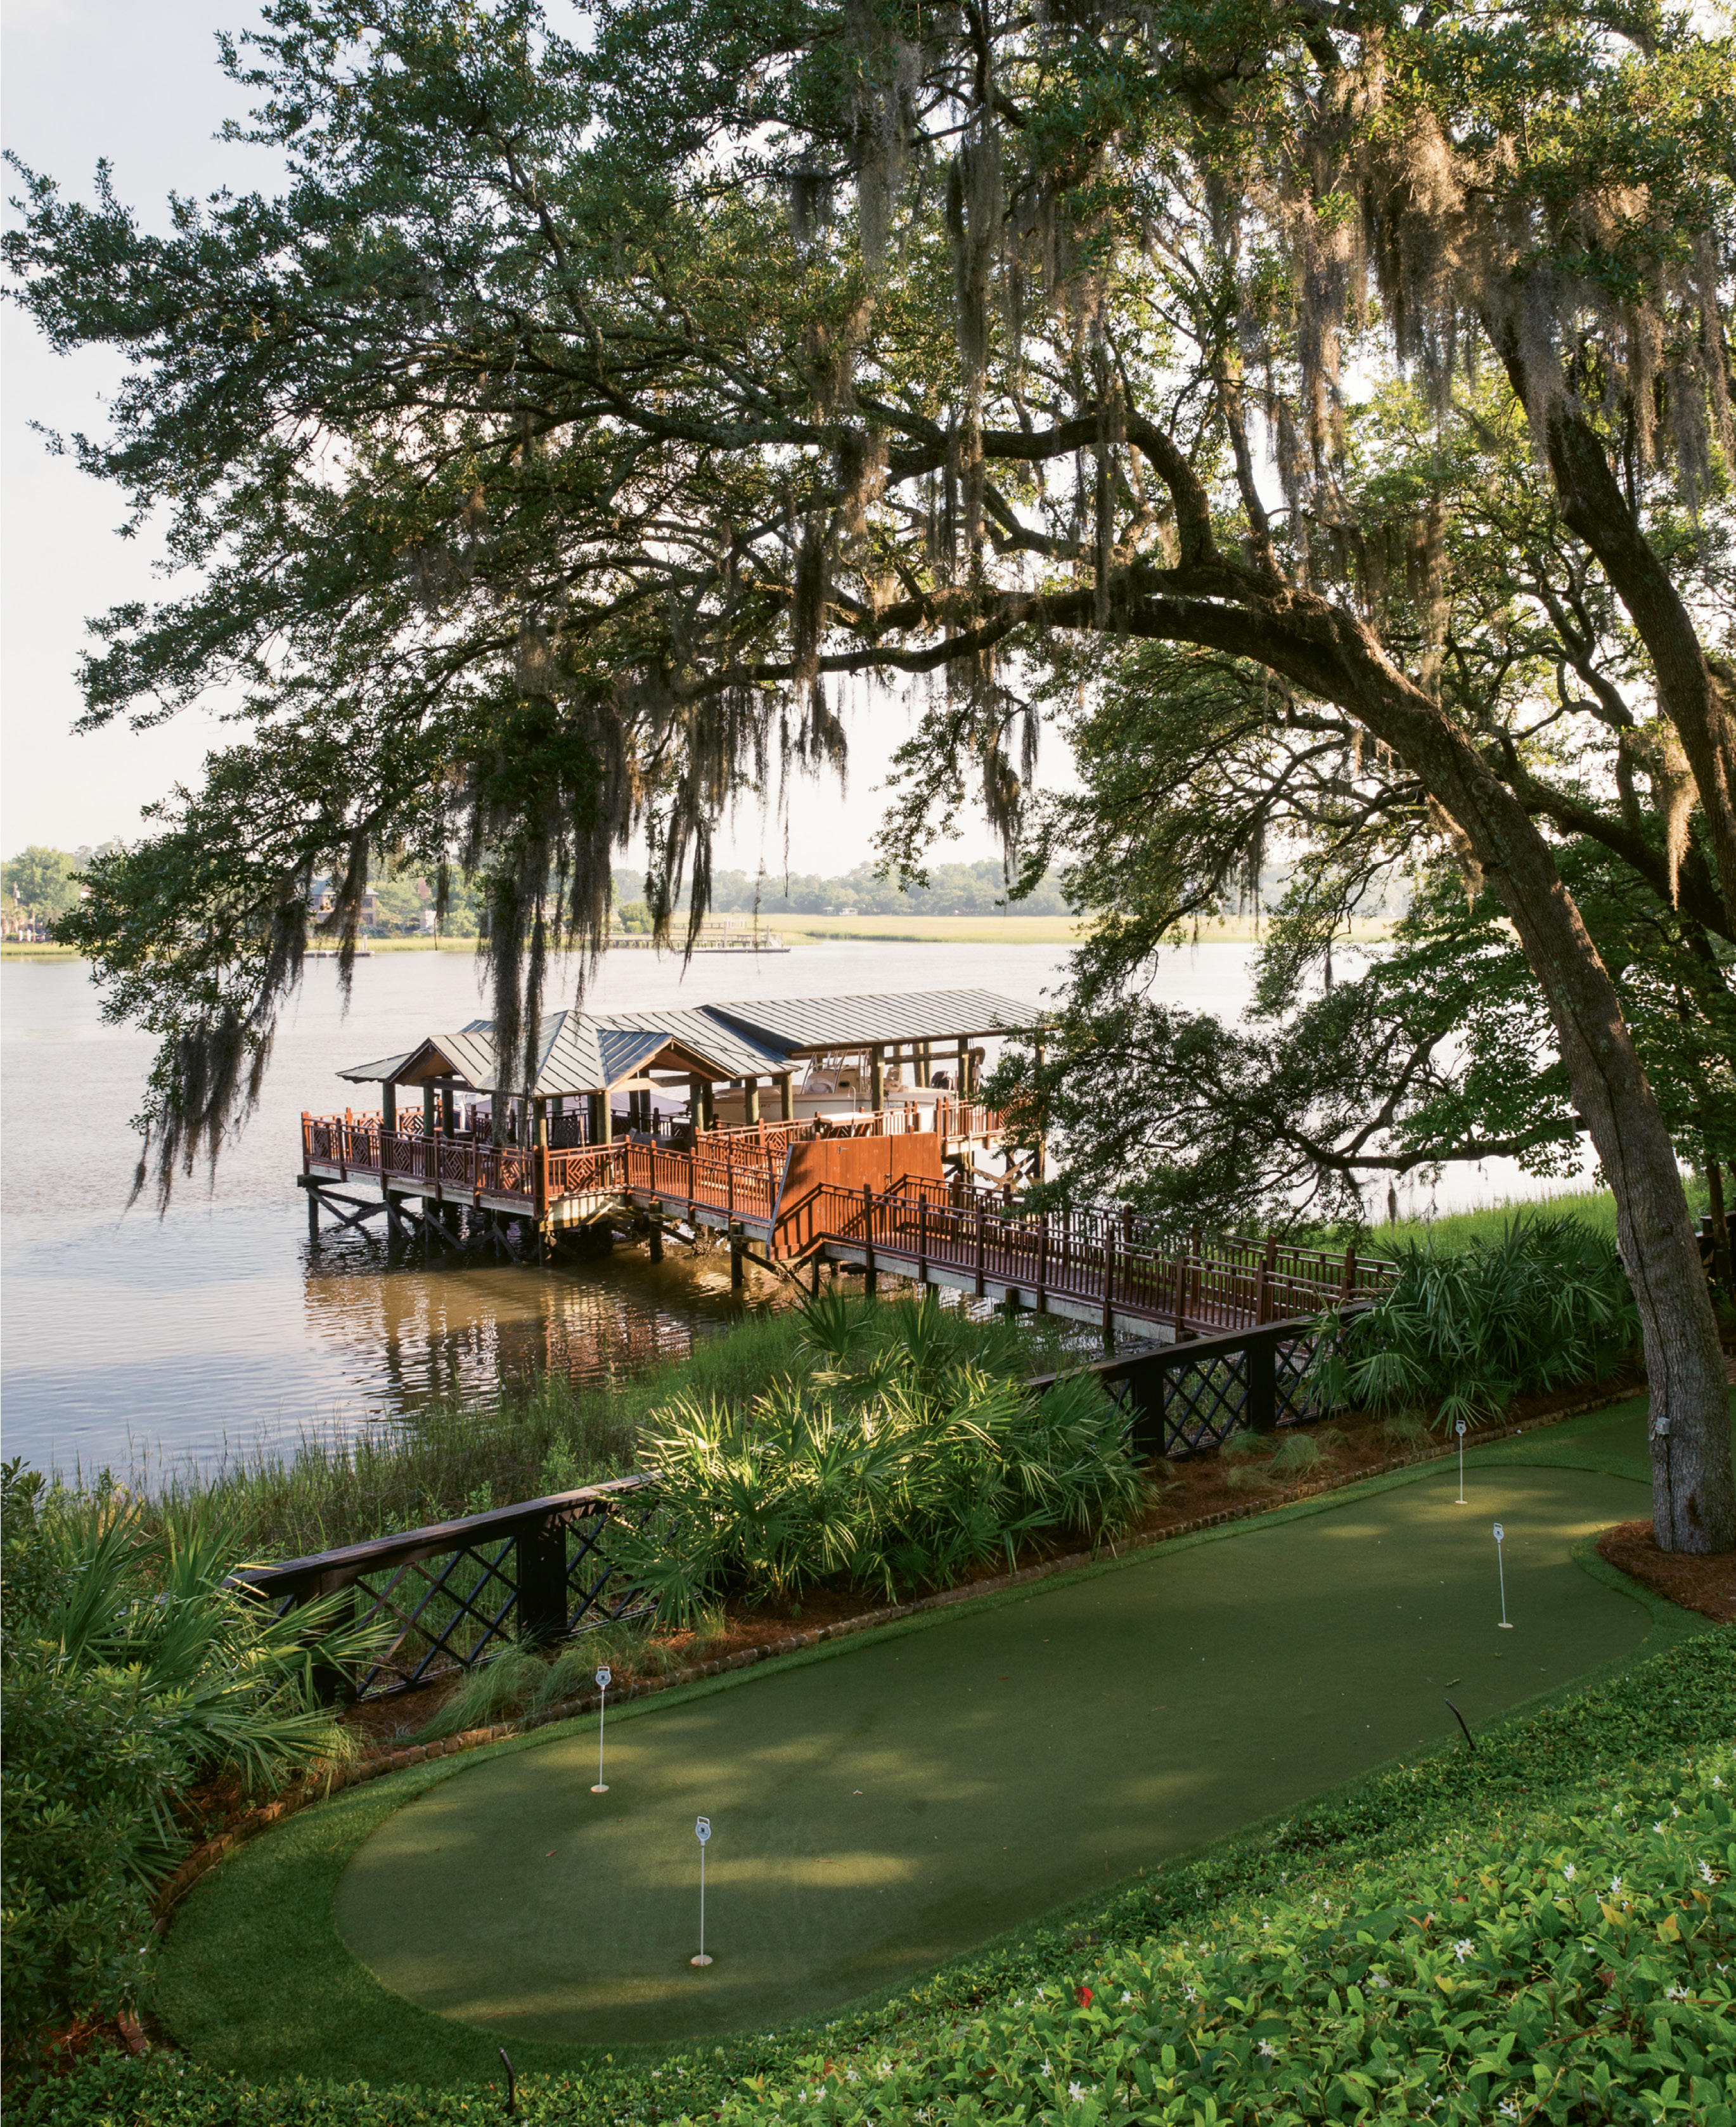 Ground Strokes: Wertimer’s landscaping cascades down to the putting green and dock with a boathouse.